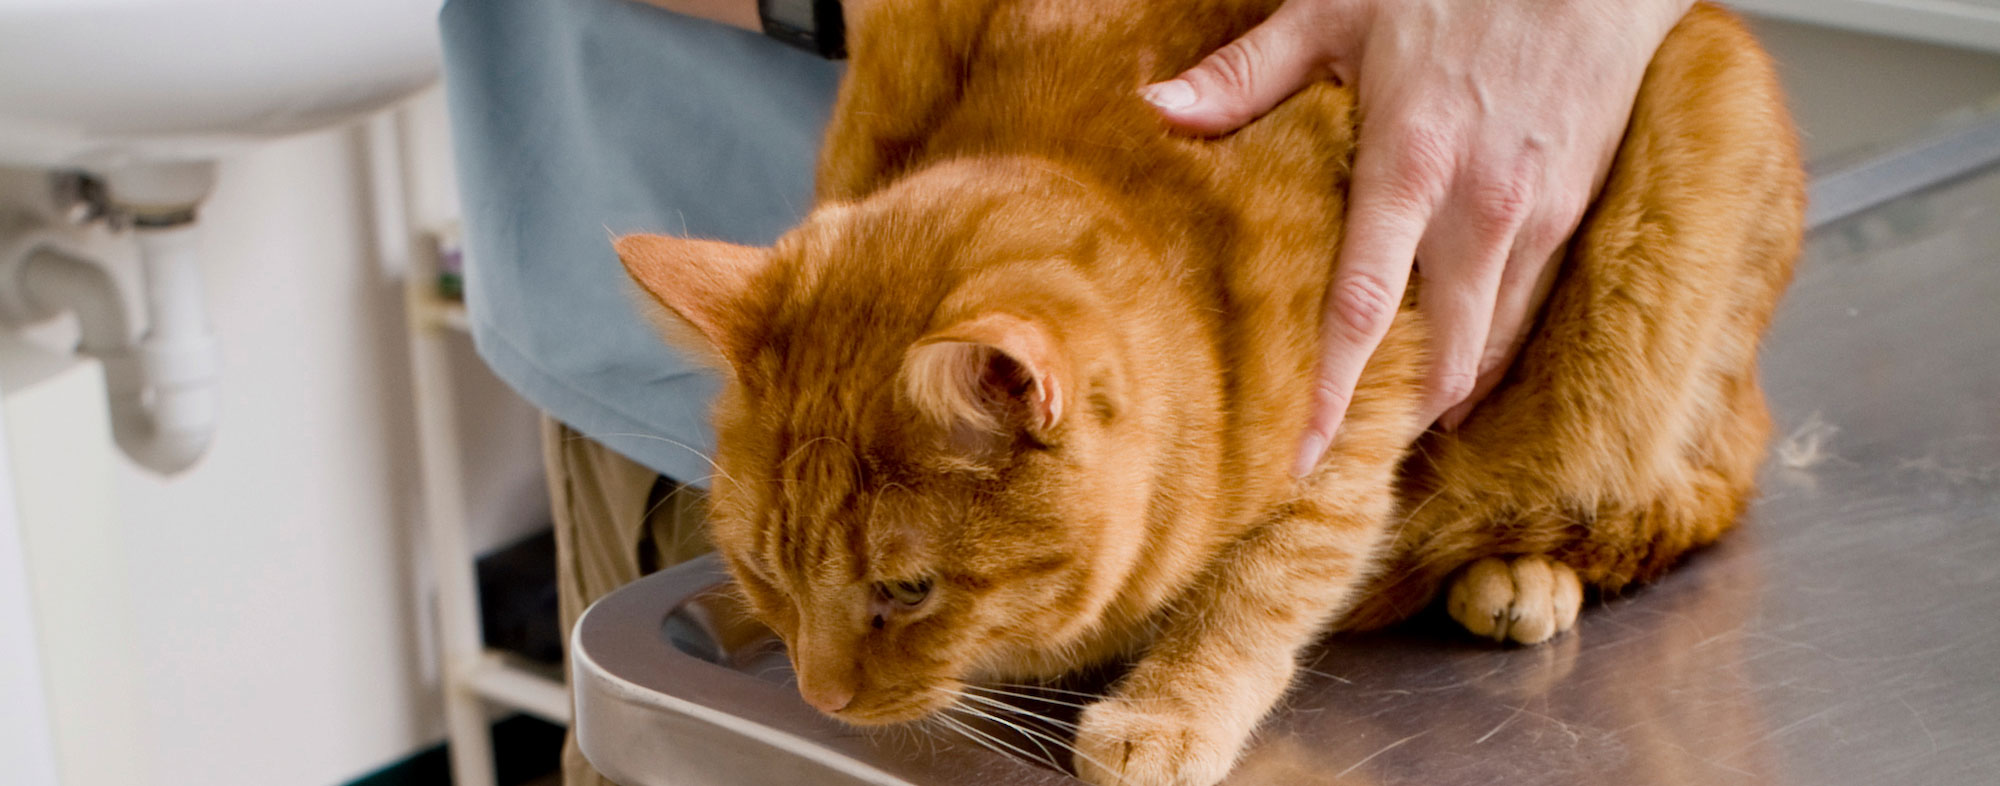 Treating A Nursing Cat For Worms | vlr.eng.br